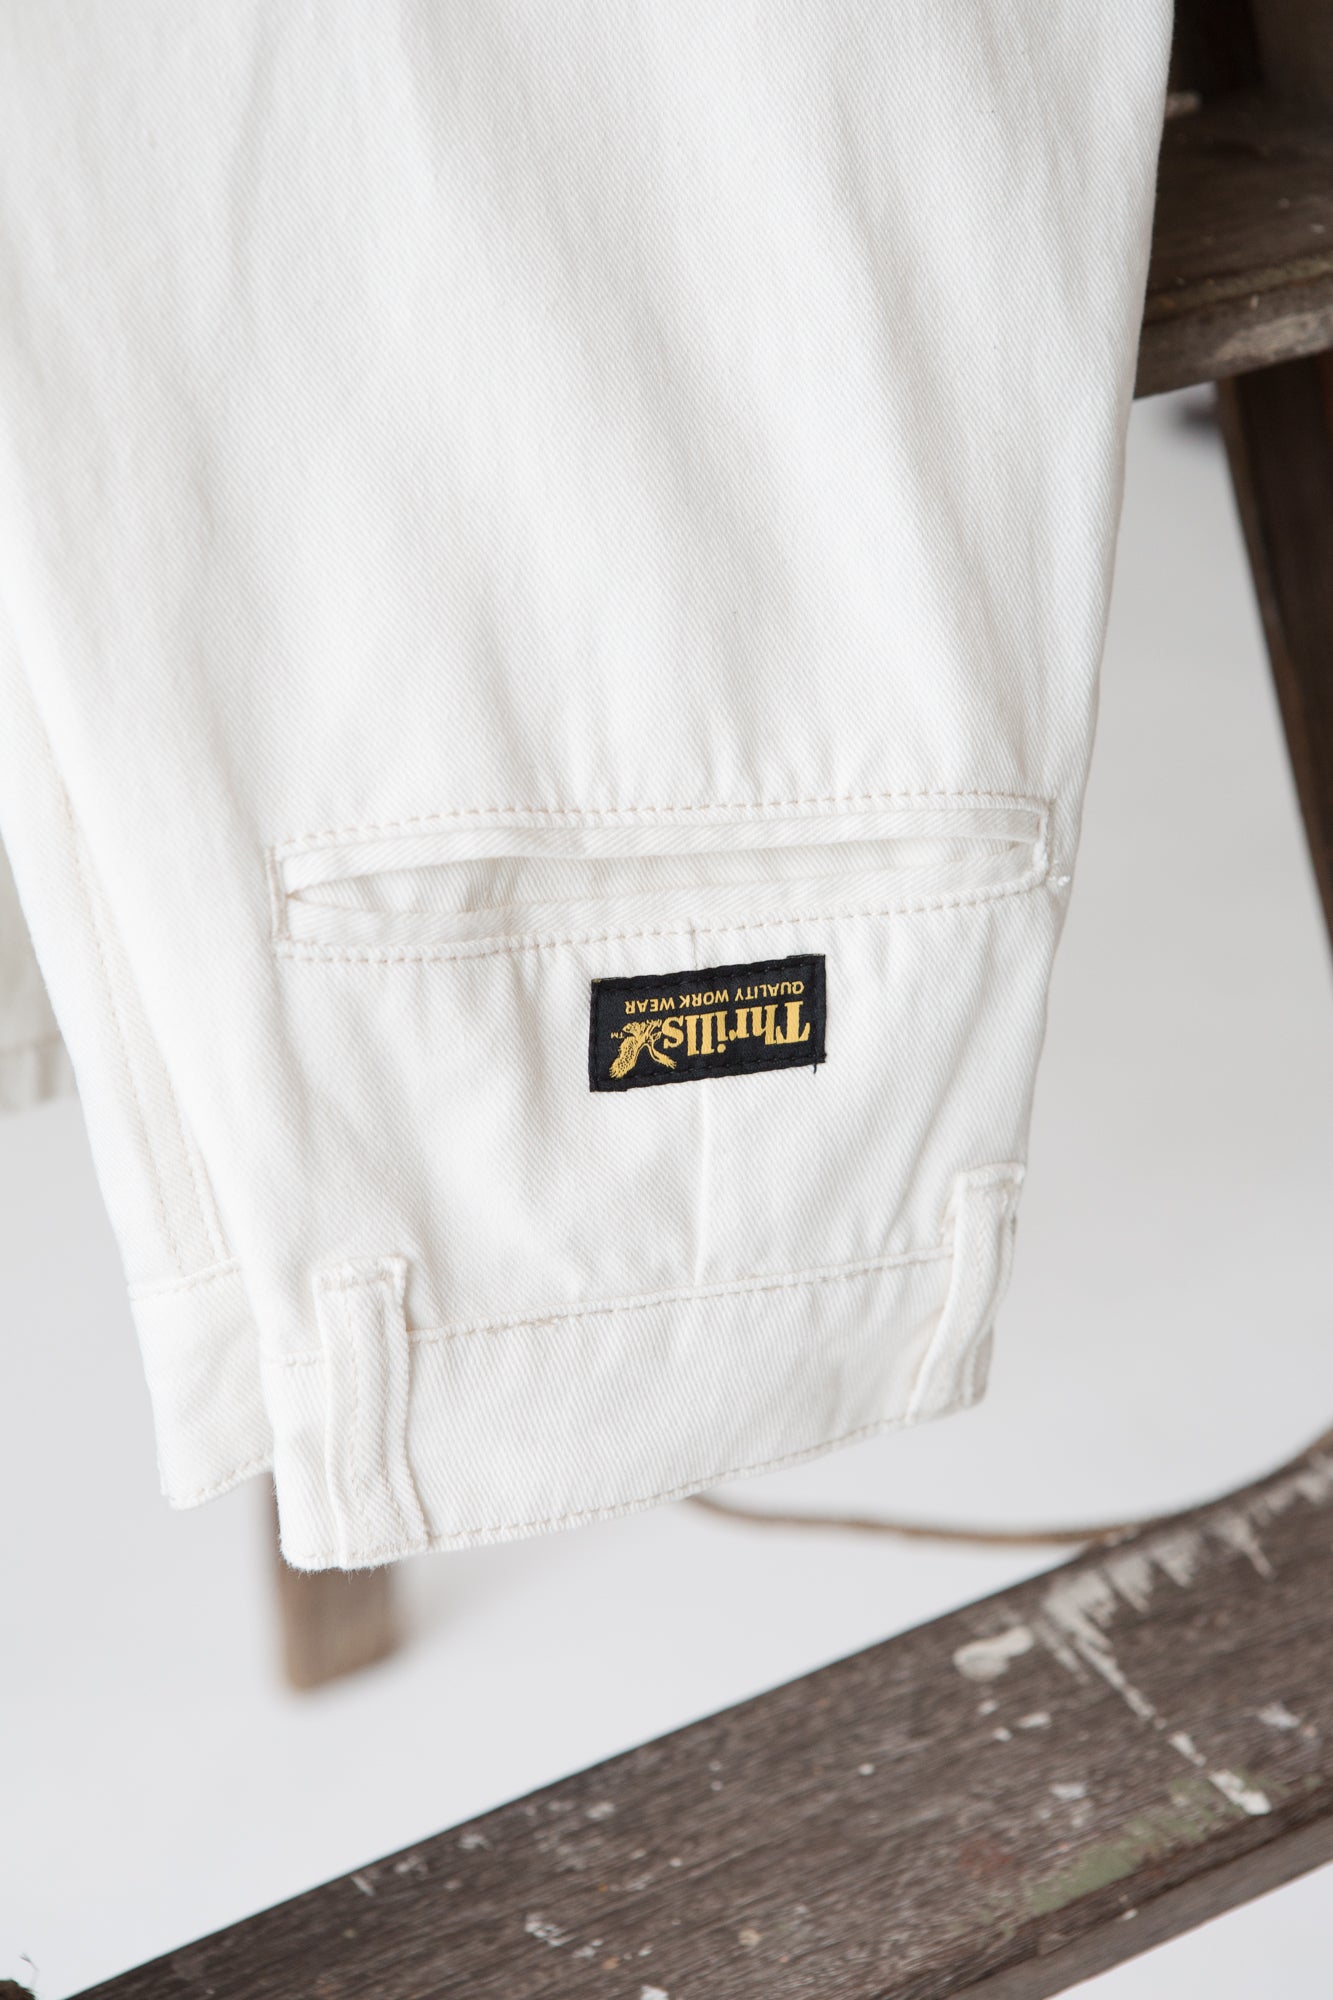 Union Baggy Pant - Heritage White